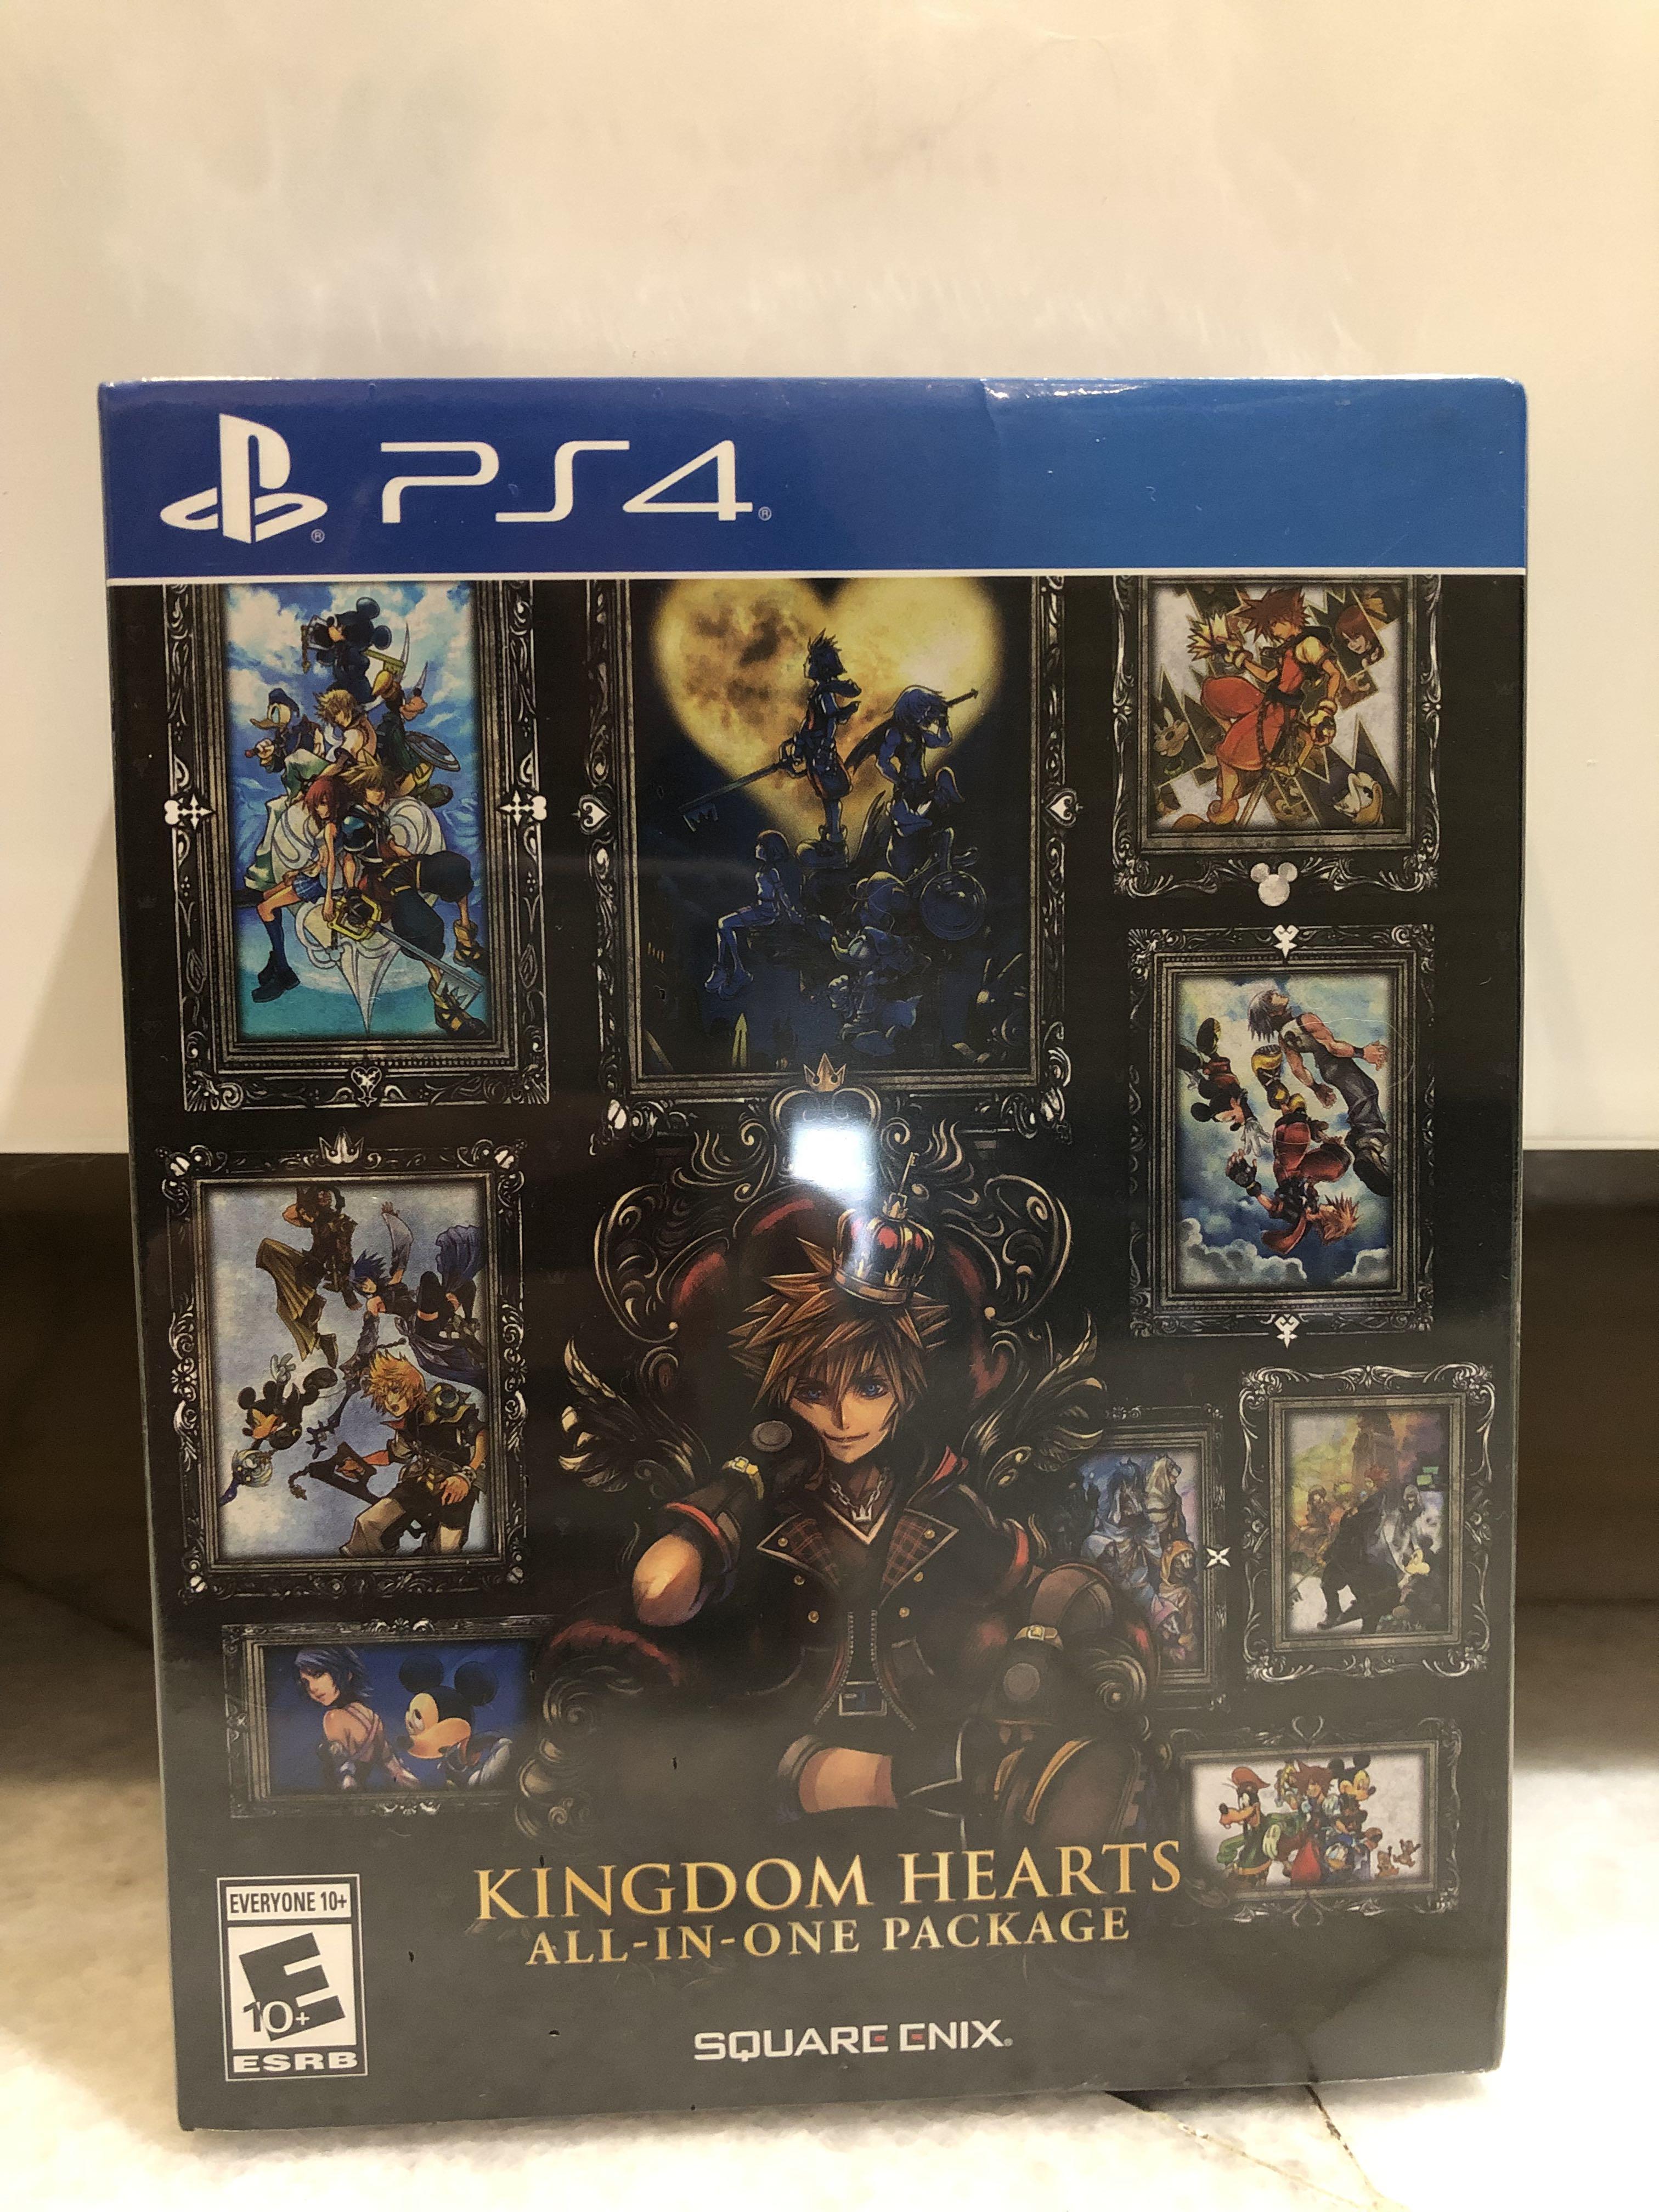 Kingdom Hearts All-In-One Package